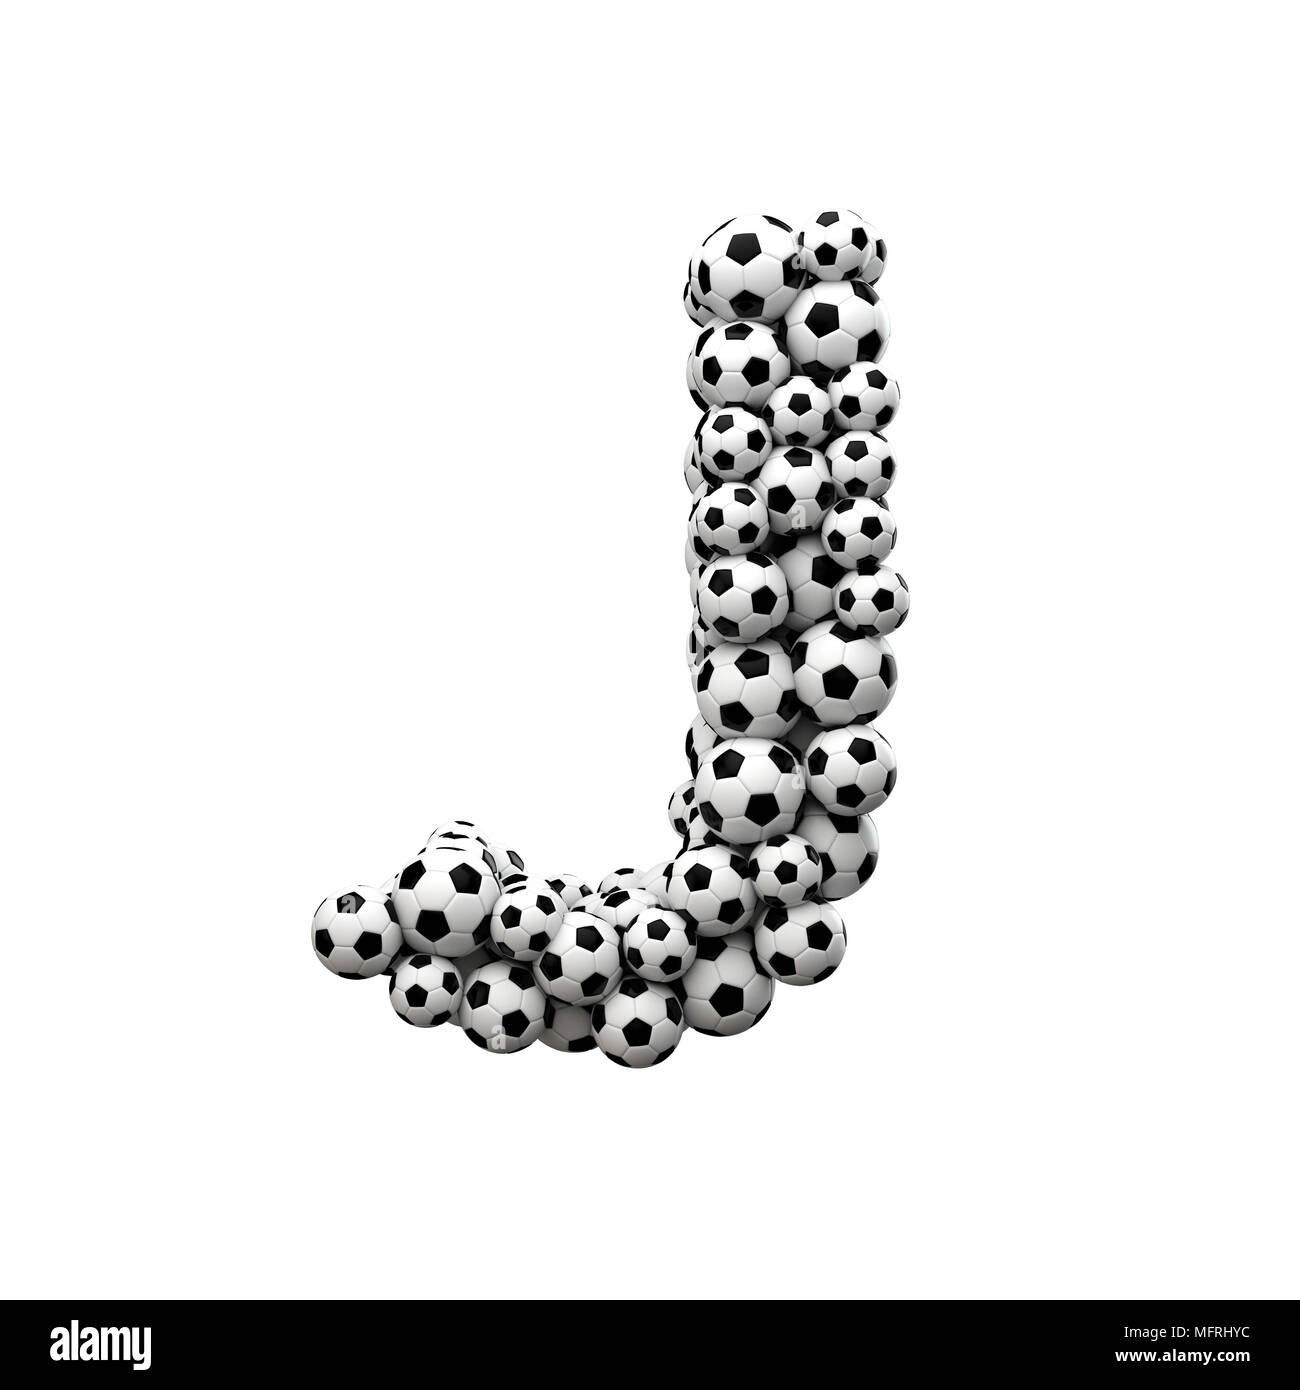 Capital letter J font made from a collection of soccer balls. 3D Rendering Stock Photo